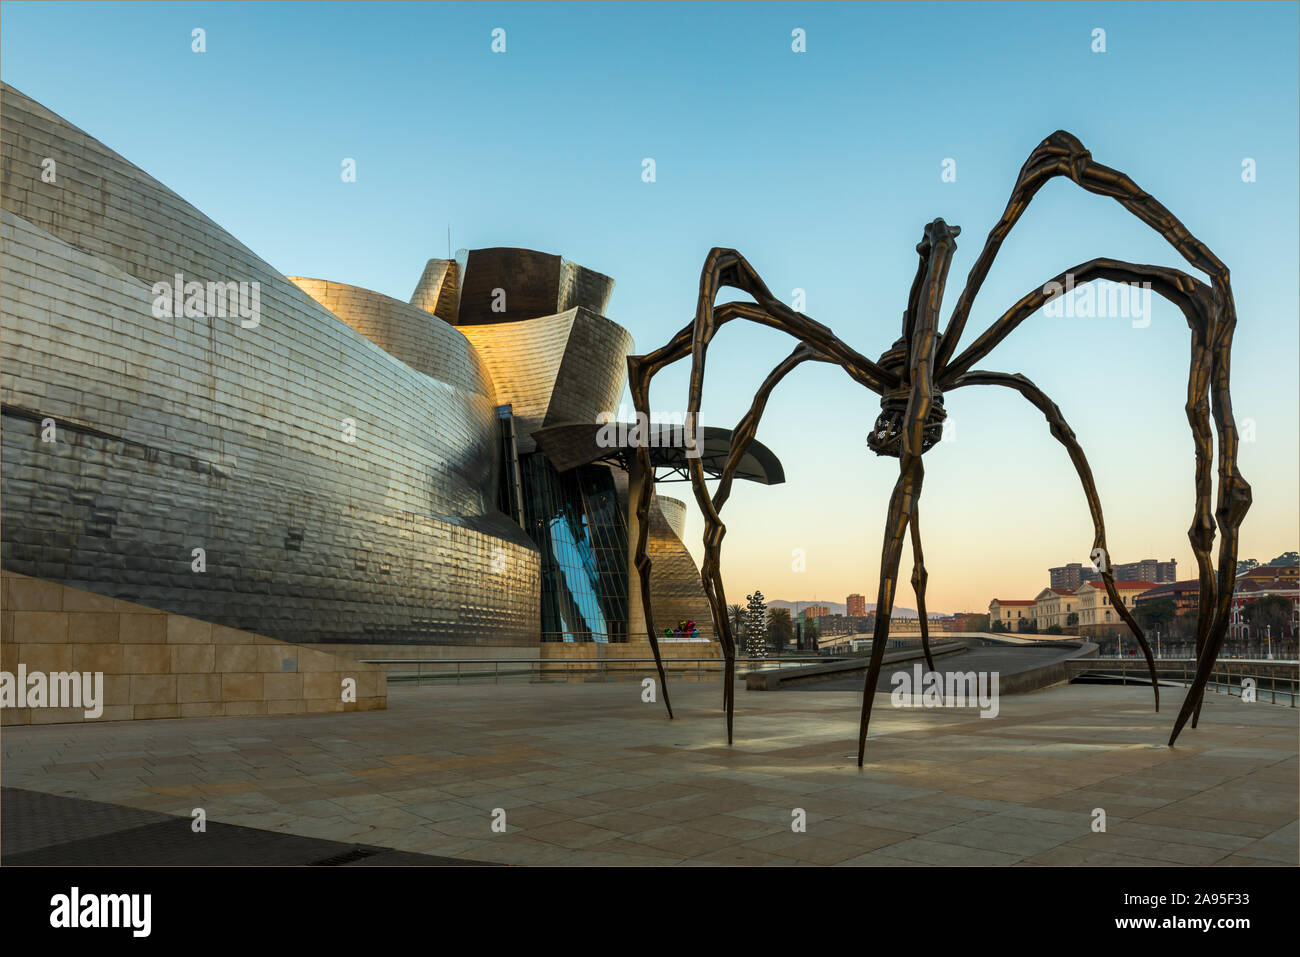 Maman spider sculpture by artist Louise Bourgeois outside the Guggenheim Museum at sunrise, Nervión River, Bilbao, Basque Country, Spain Stock Photo